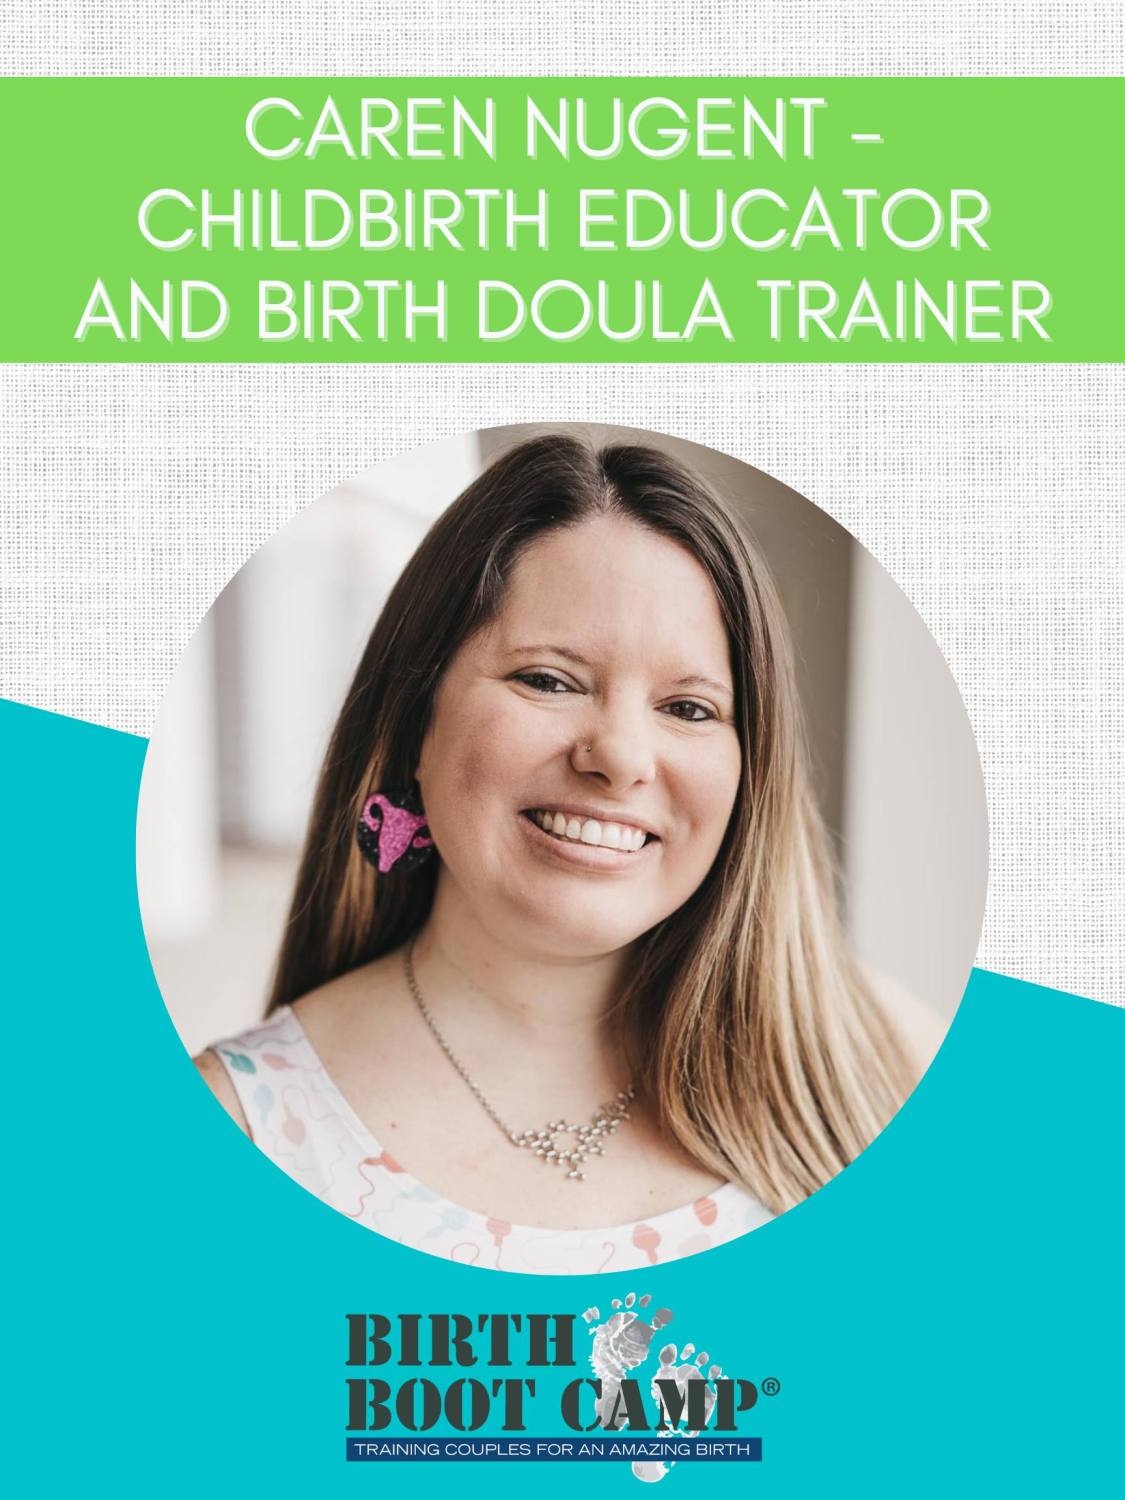 Caren Nugent – Childbirth Educator and Birth Doula Trainer